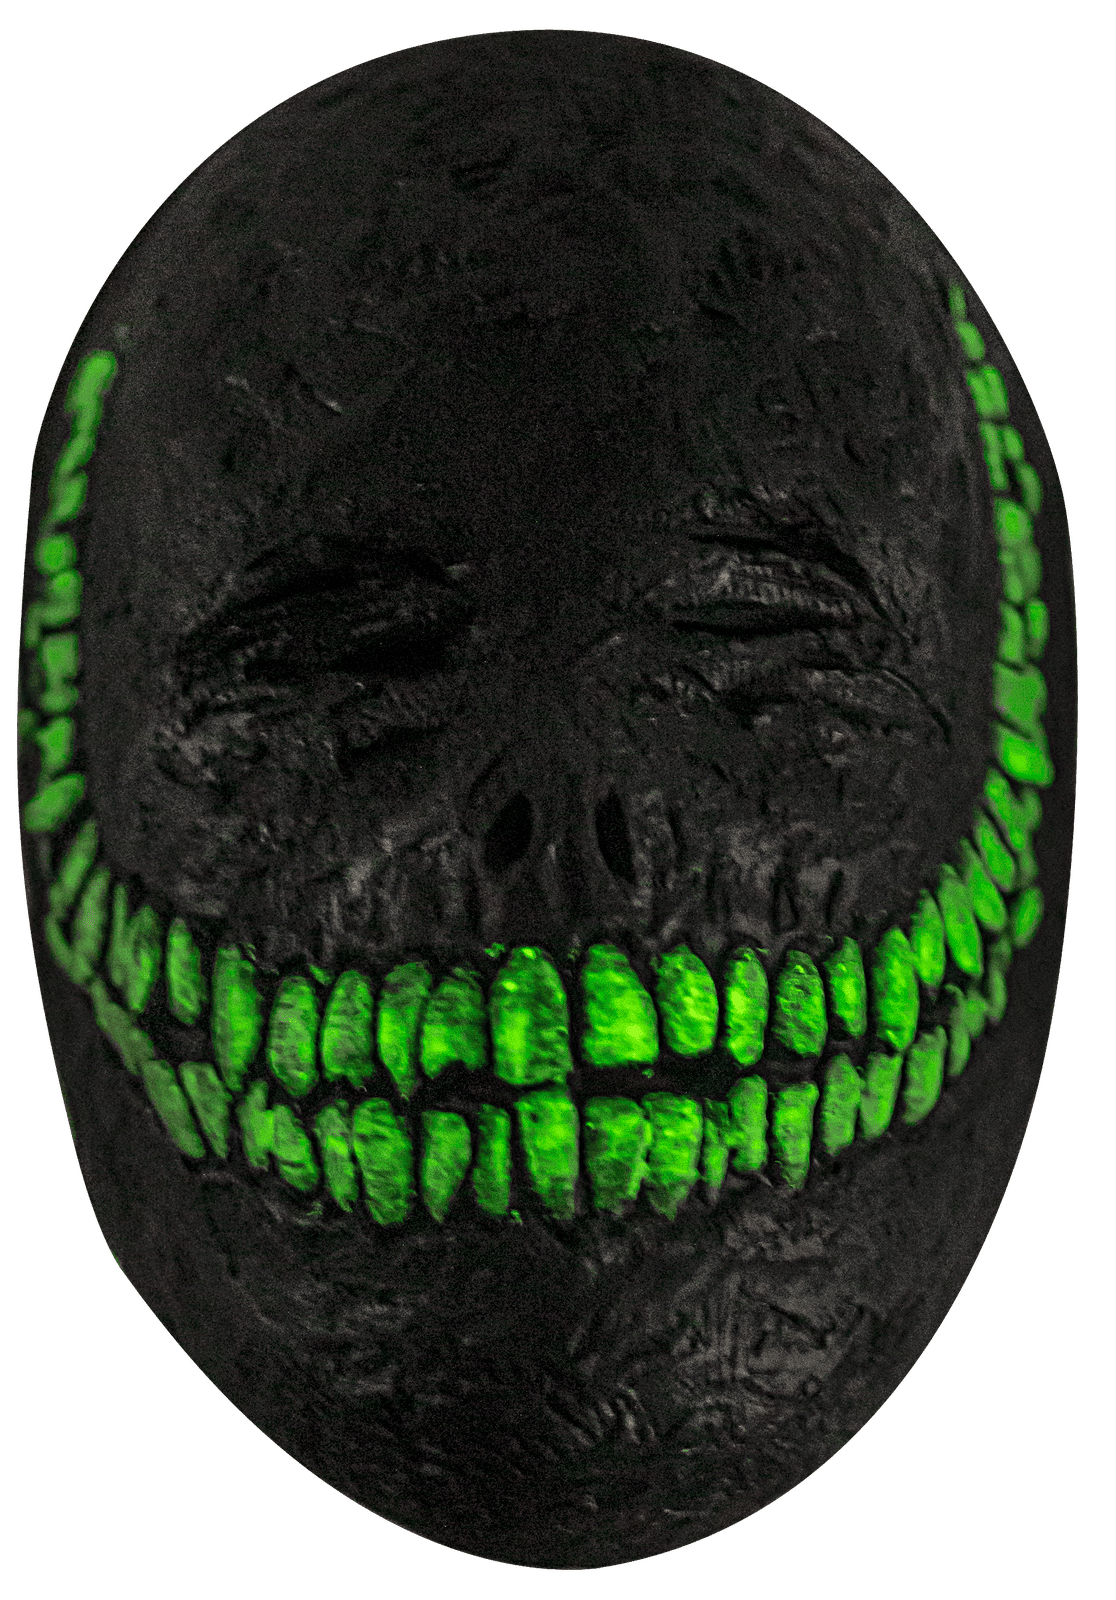 Creepy Grinning Glow in the Dark Mask 8